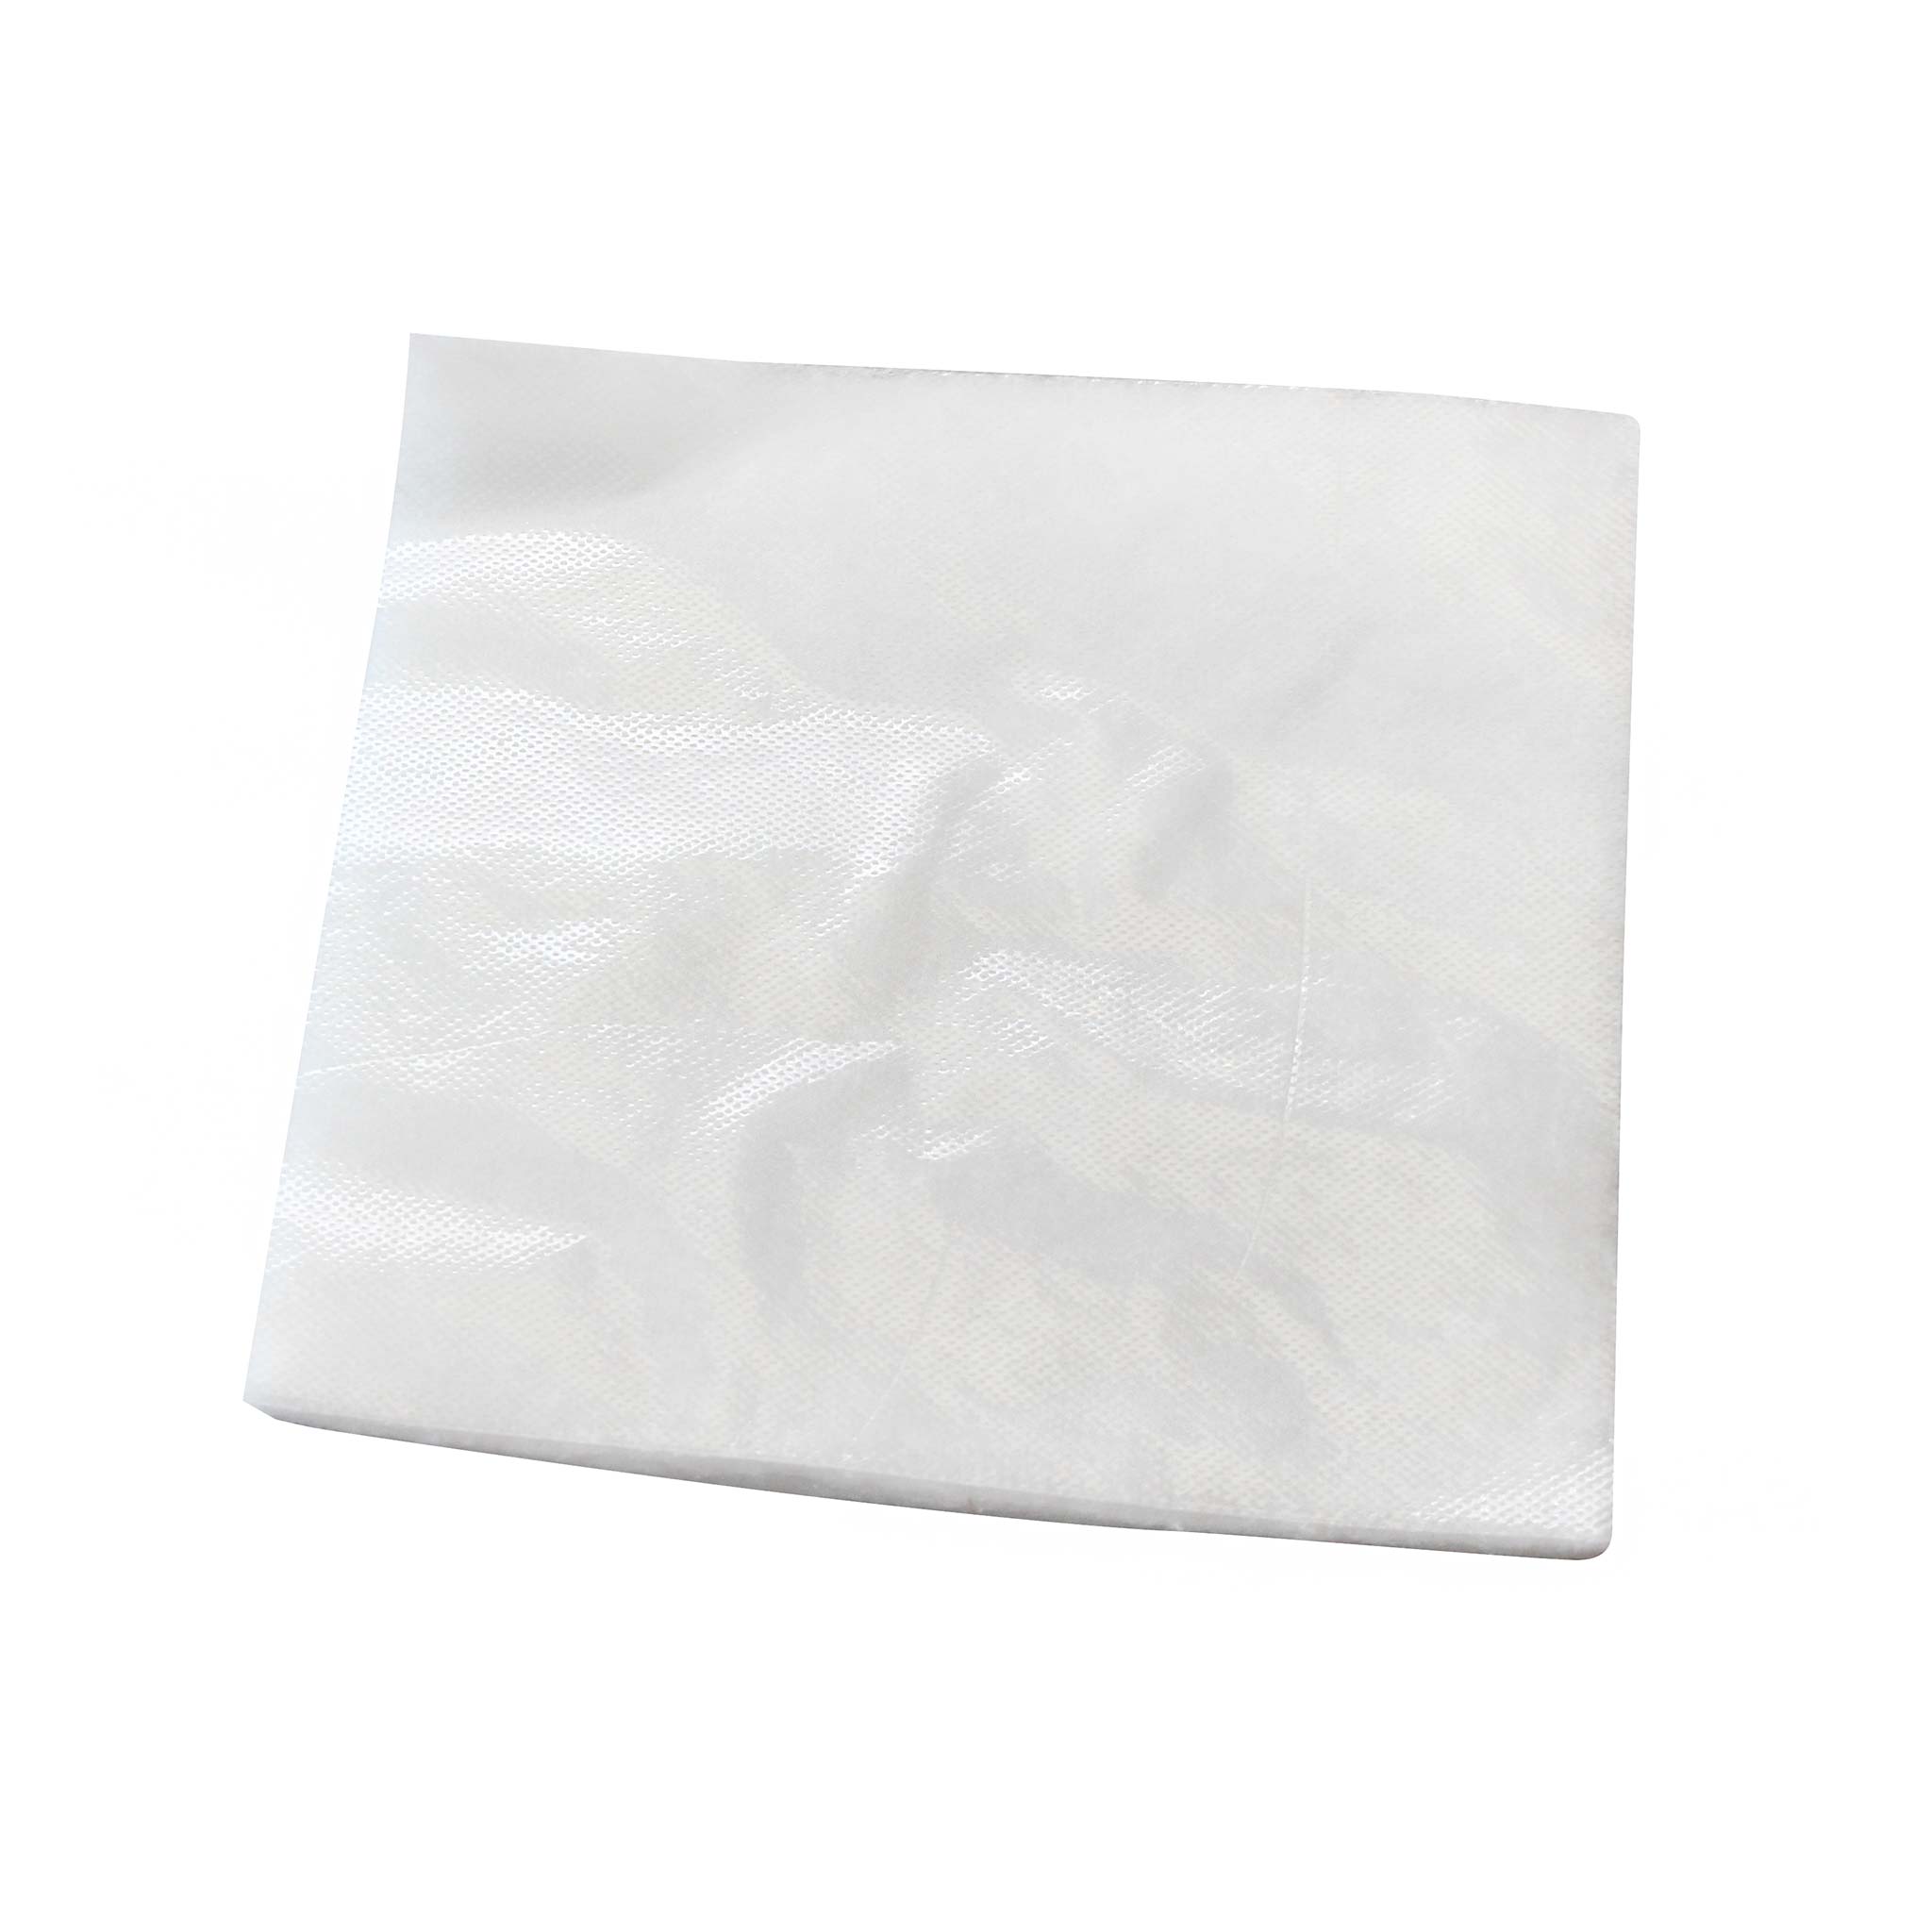 Melolin Low Adherent Wound Dressing (Highly Absorbent) - Single - vet-n ...